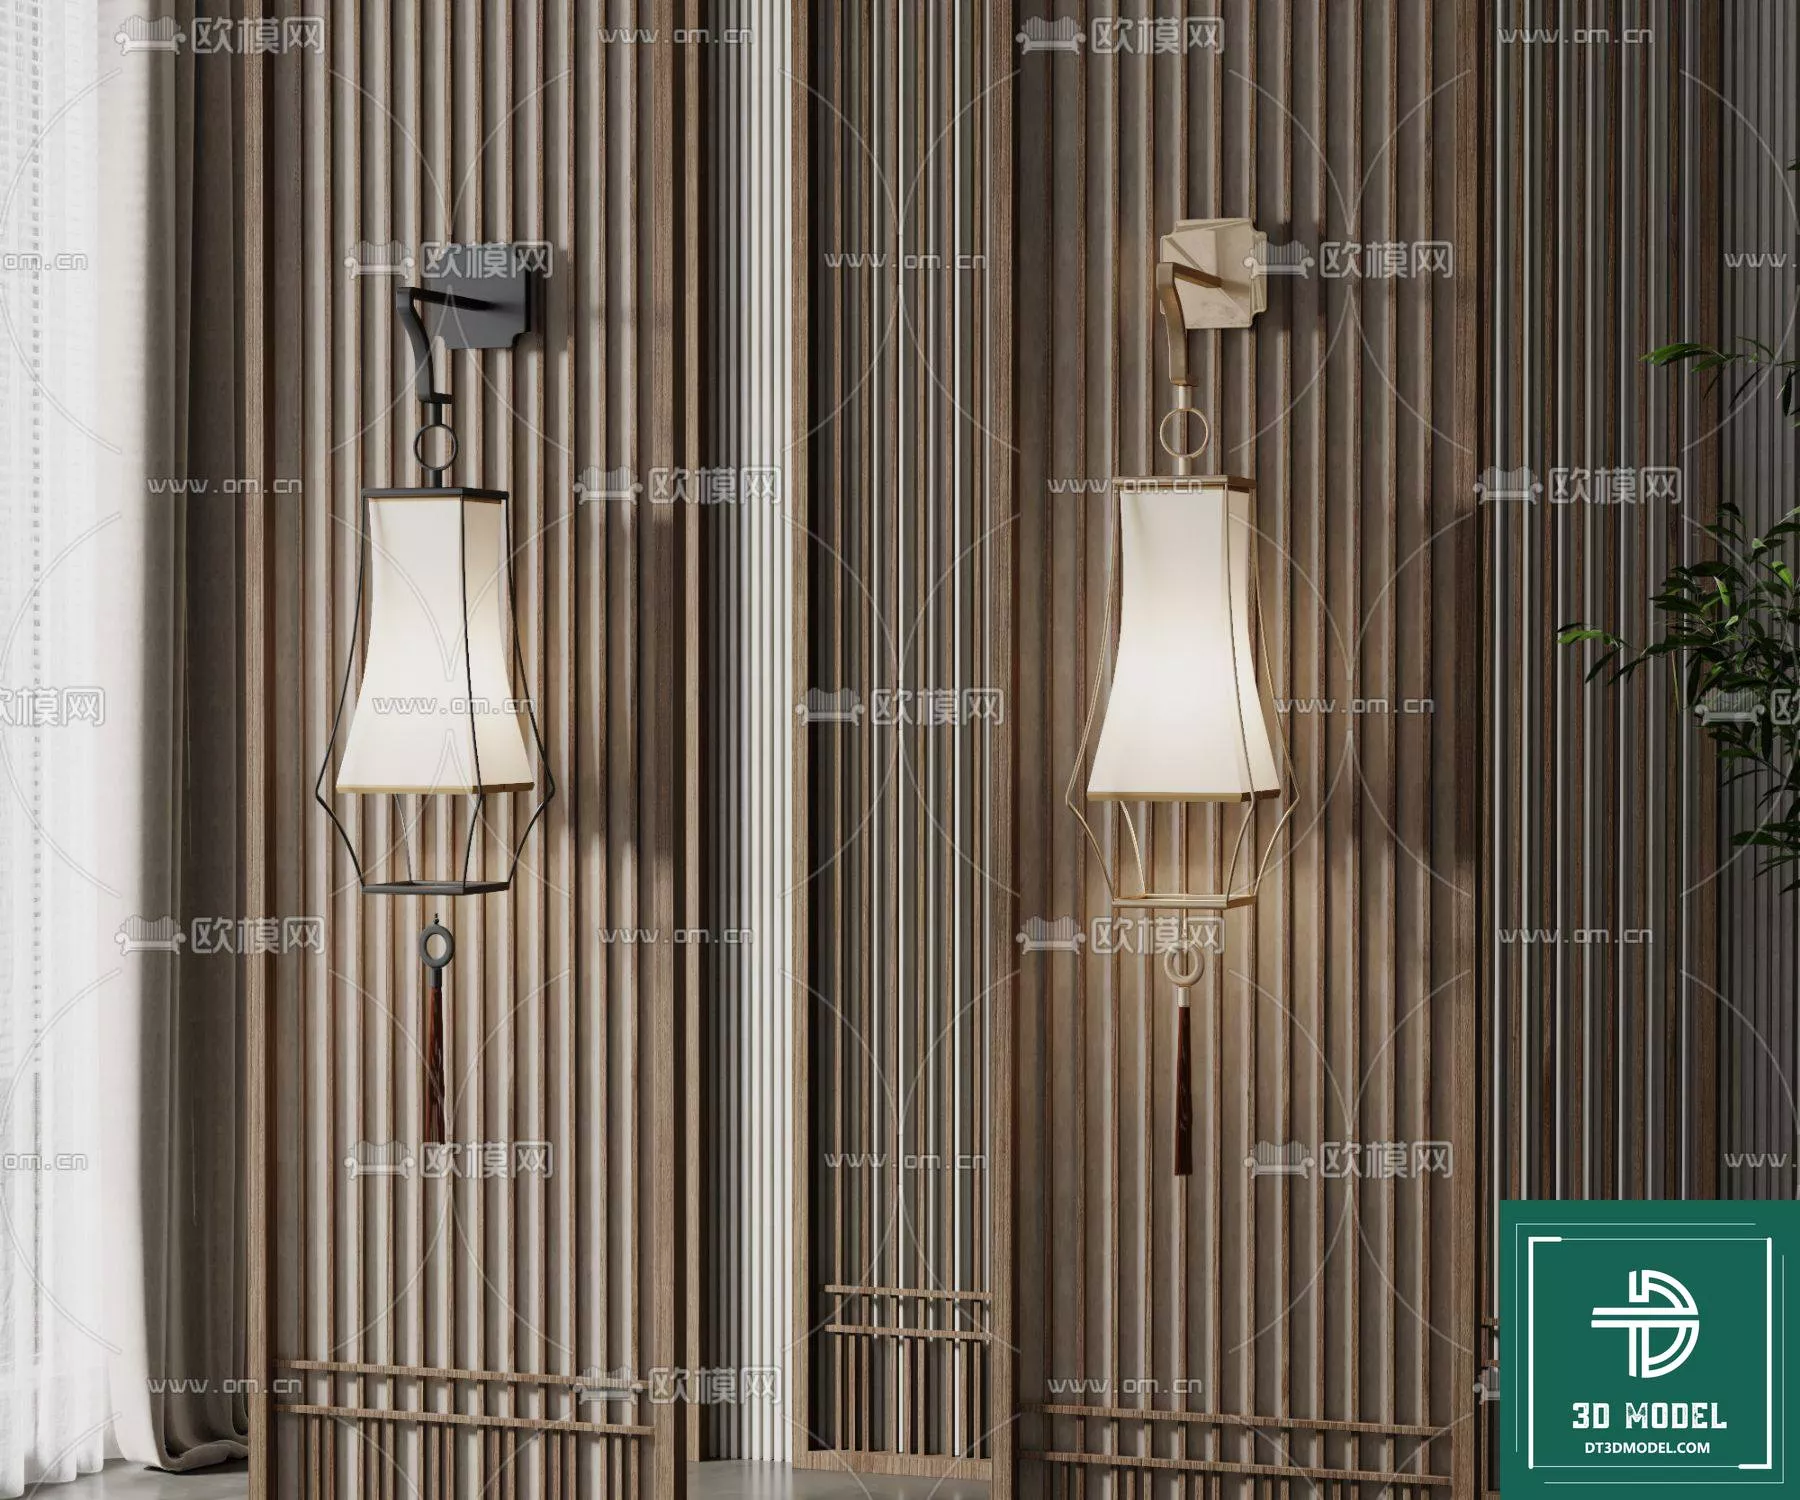 MODERN WALL LAMP - SKETCHUP 3D MODEL - VRAY OR ENSCAPE - ID16103